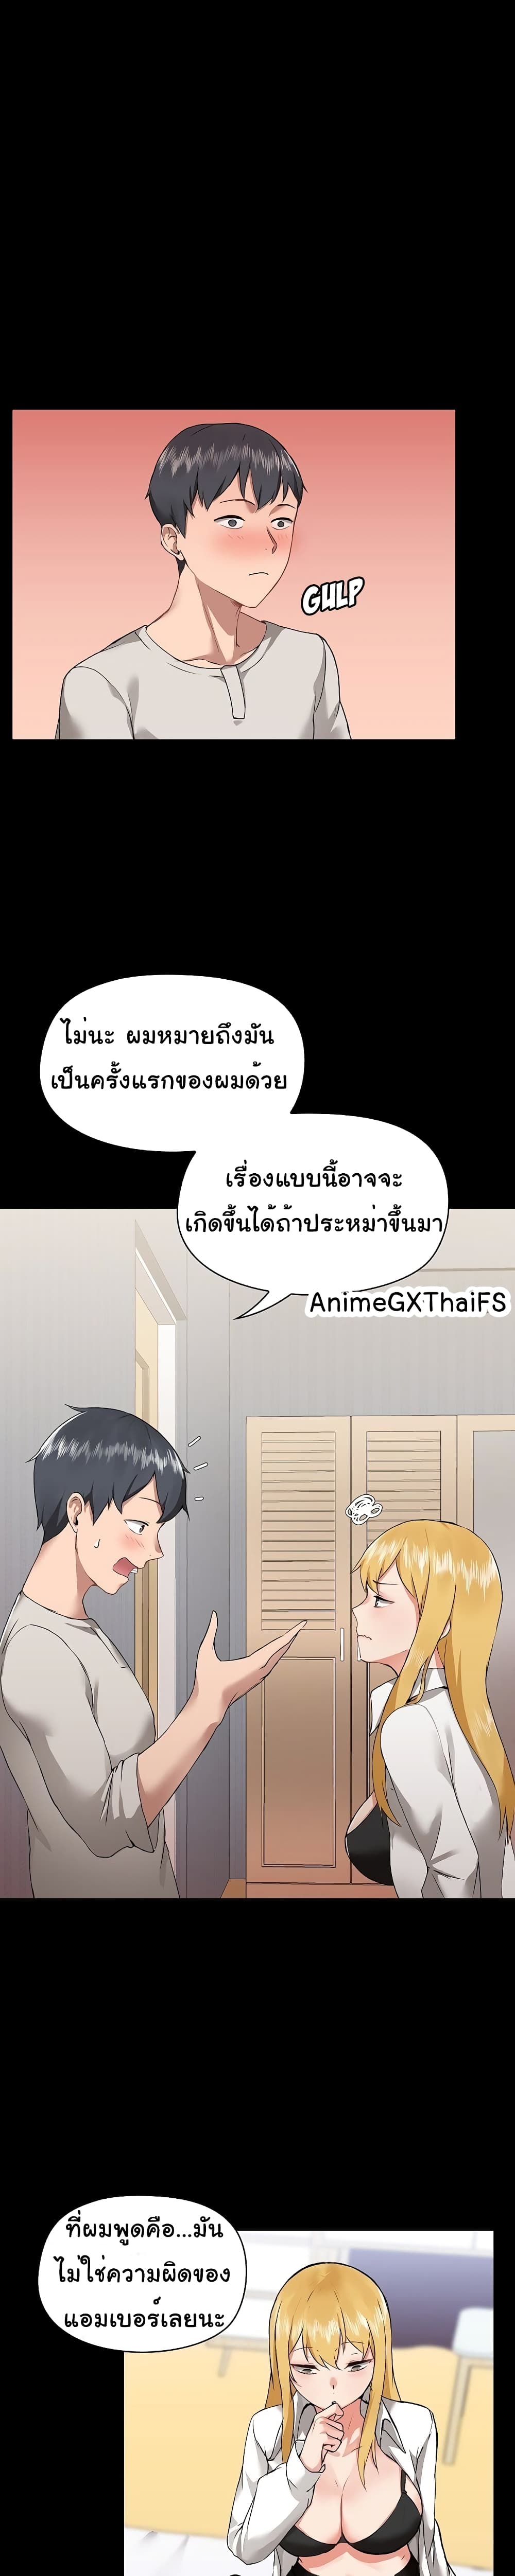 All About That Game Life 3 ภาพที่ 10